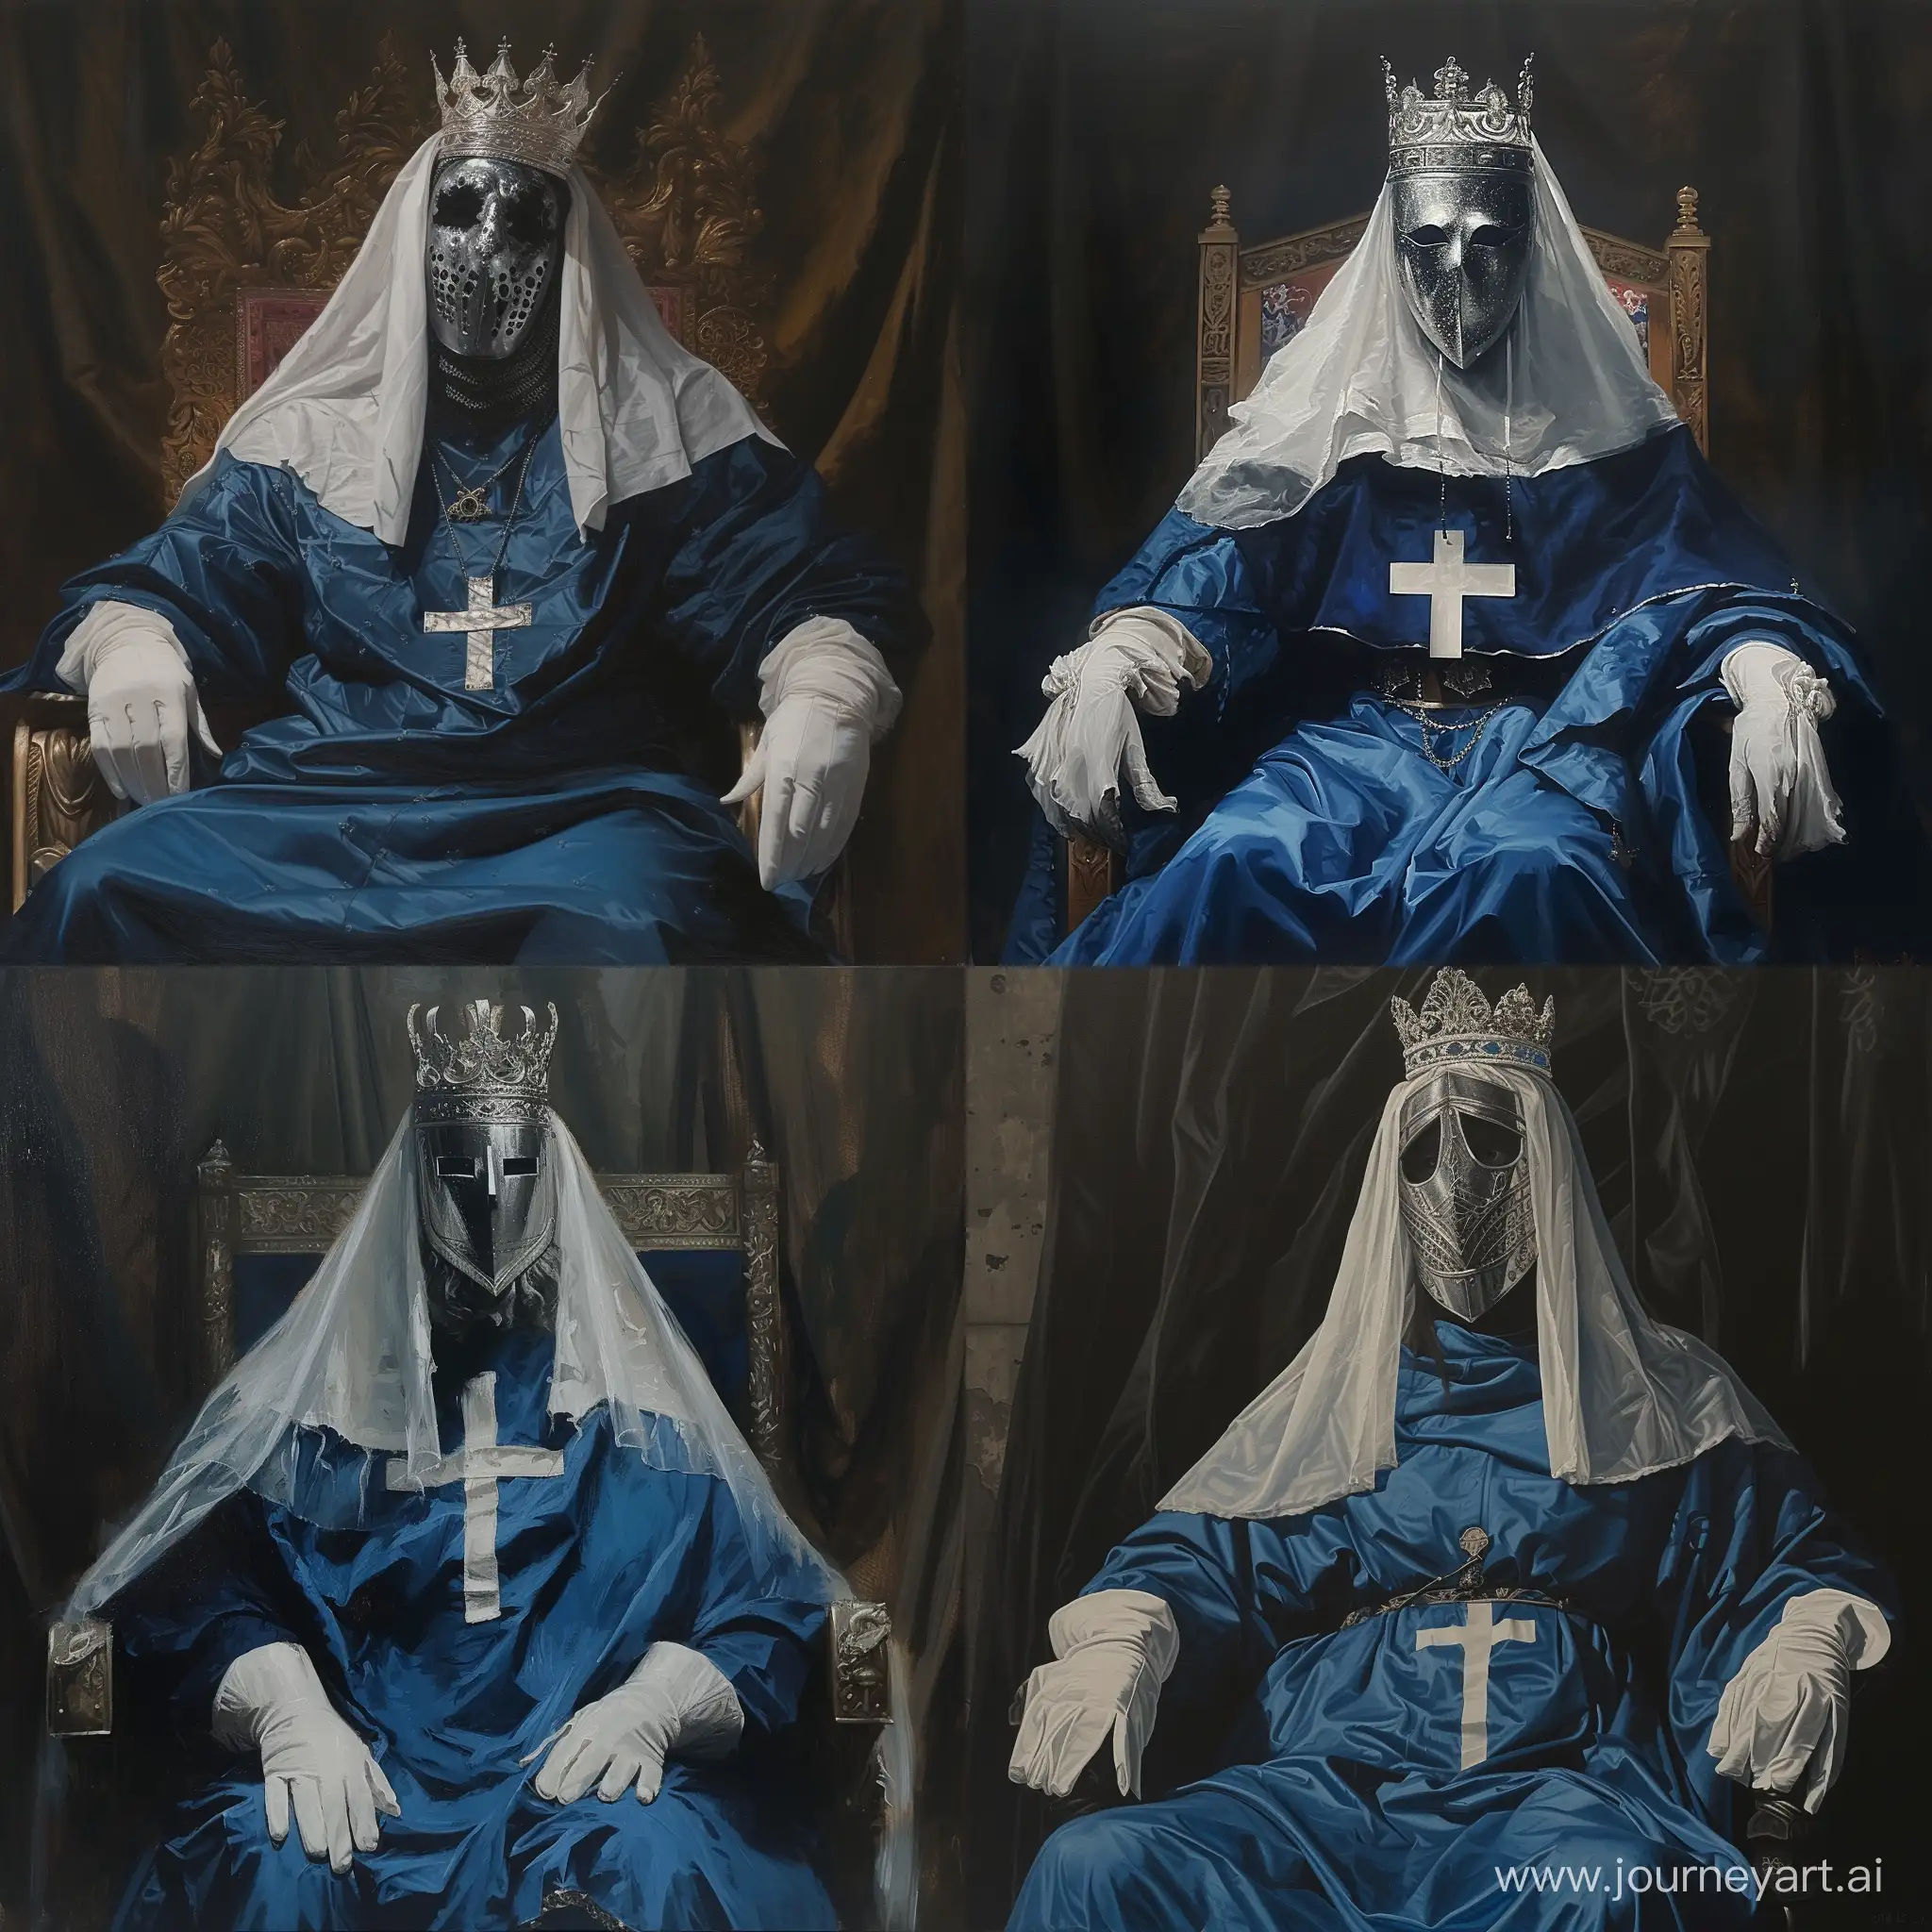 Dark oil painting of Baldwin IV of Jerusalem. He is wearing a face covering silver mask, blue robe and a white cross on it ,white veil and king crown. He has white silk gloves. Sitting on throne. Dark color brush strikes oil painting.